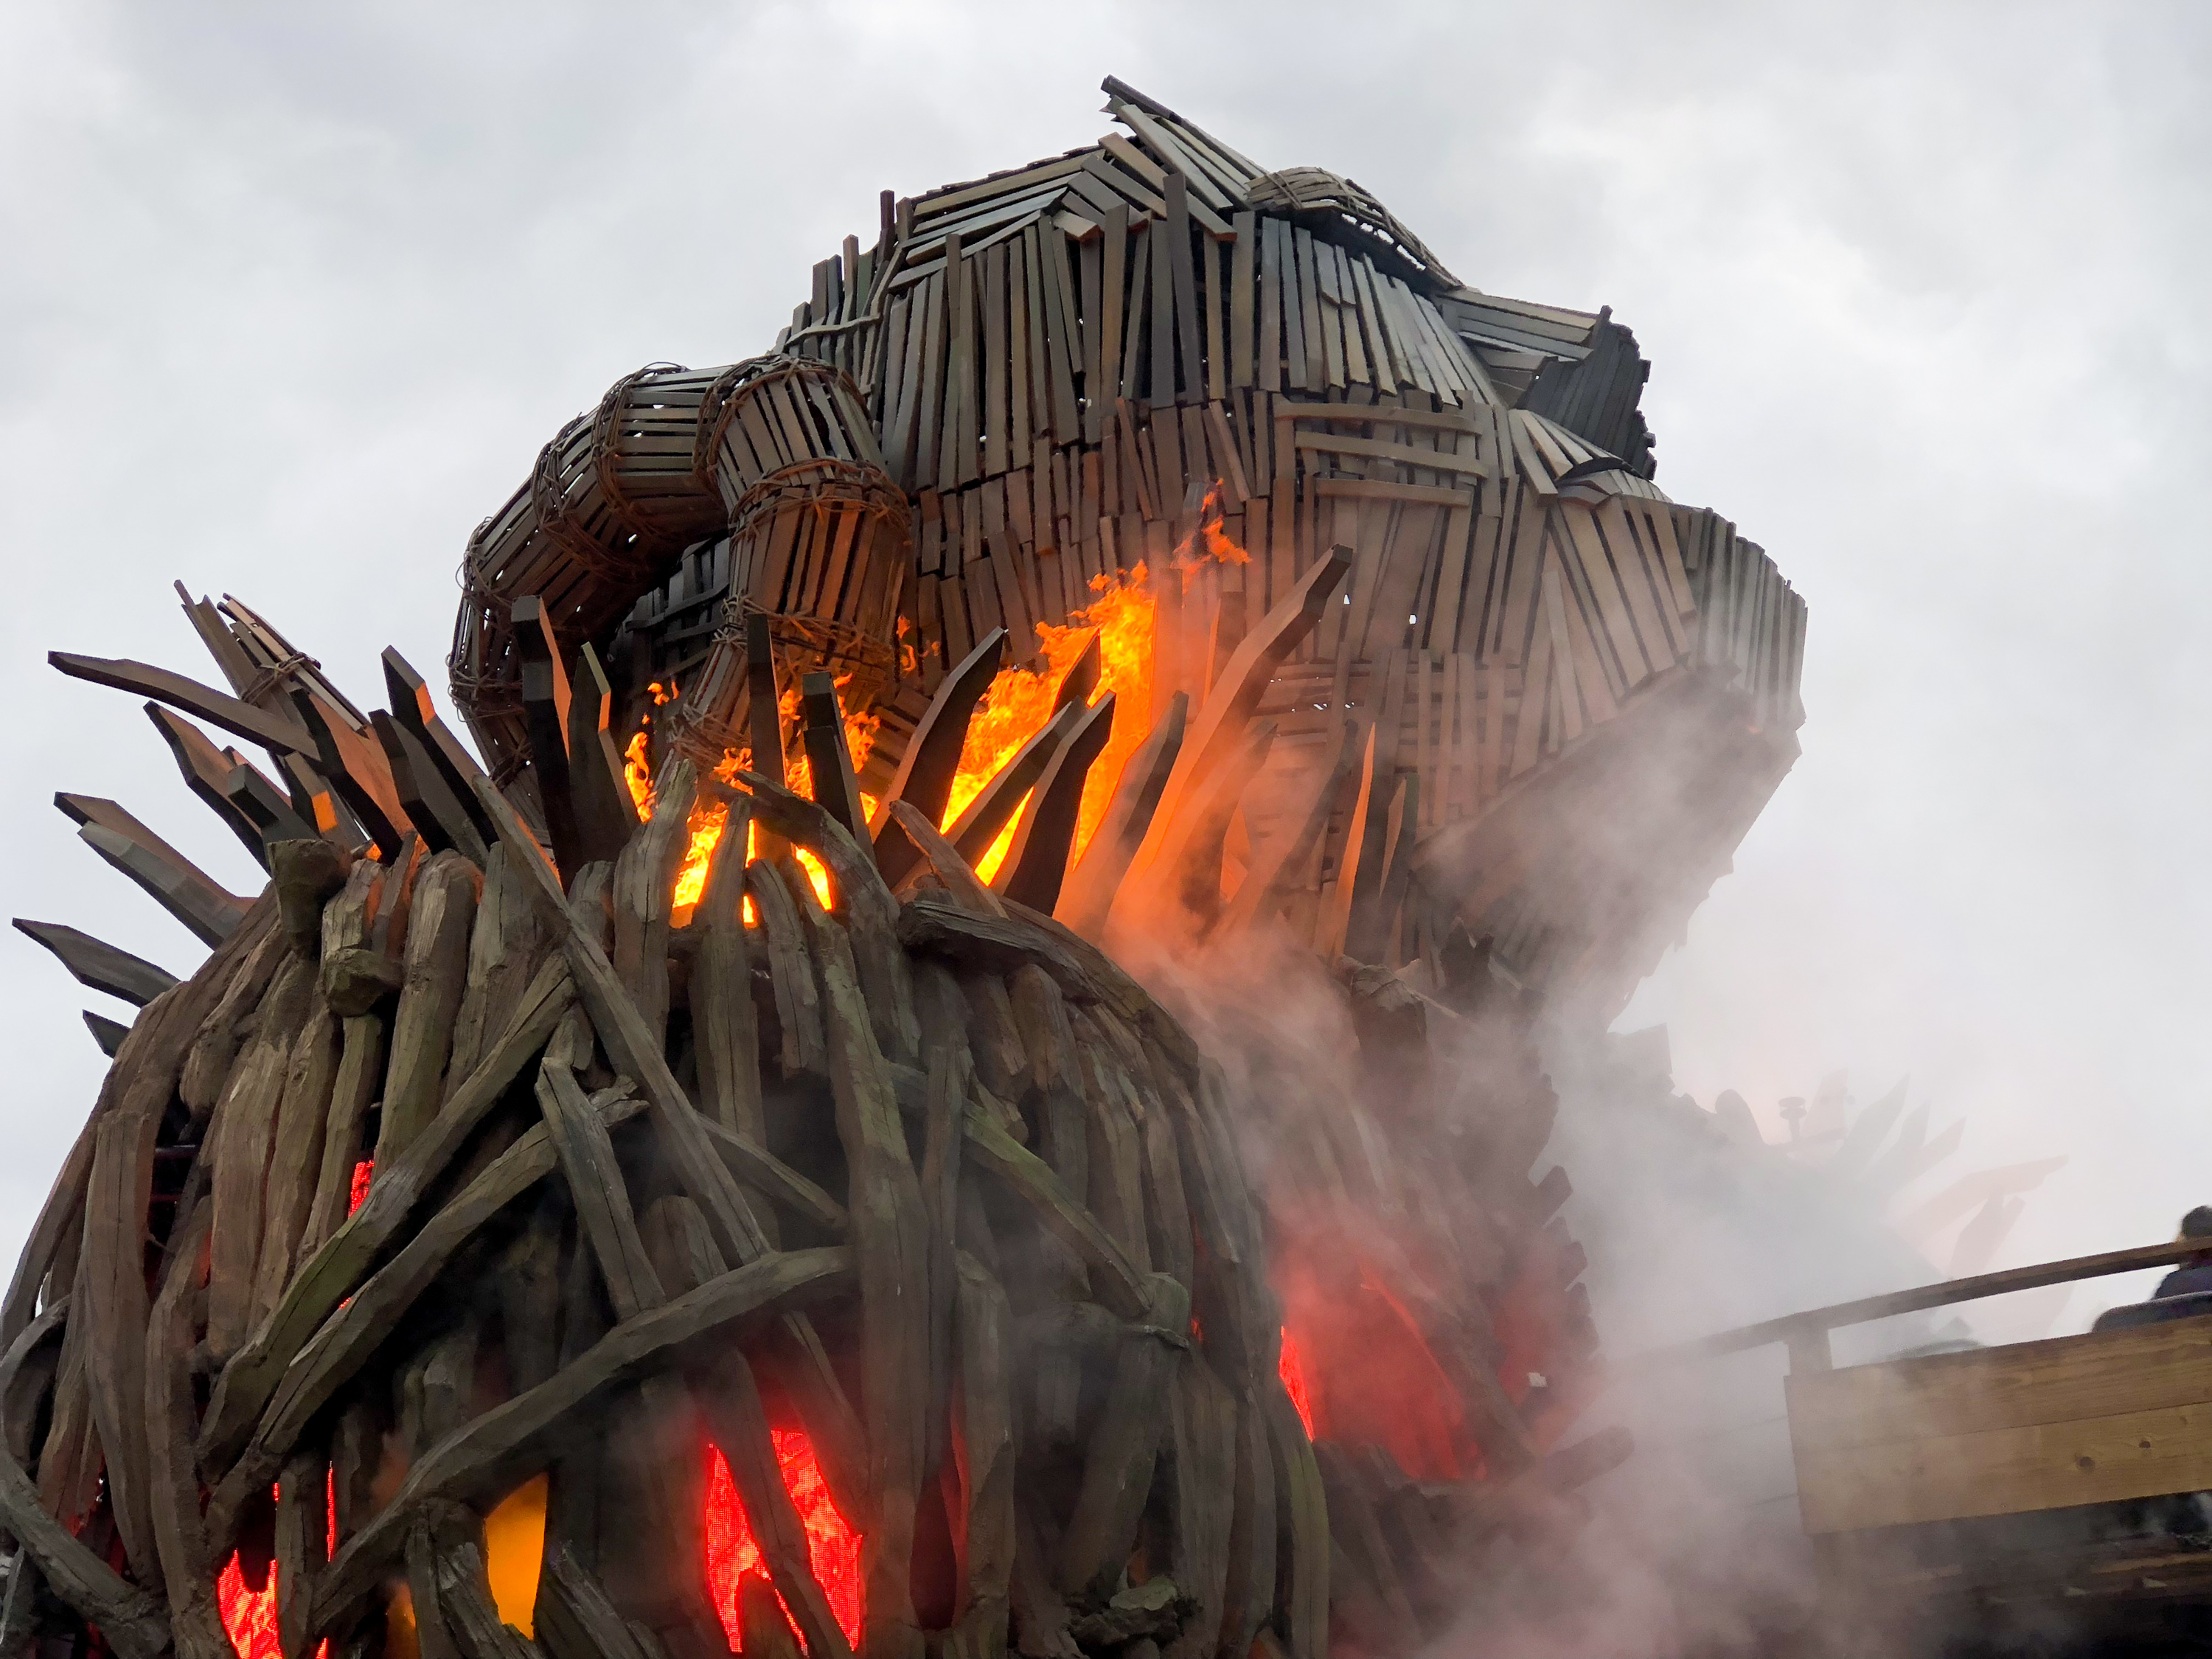 Wicker Man Opens To Public After Weather Delays